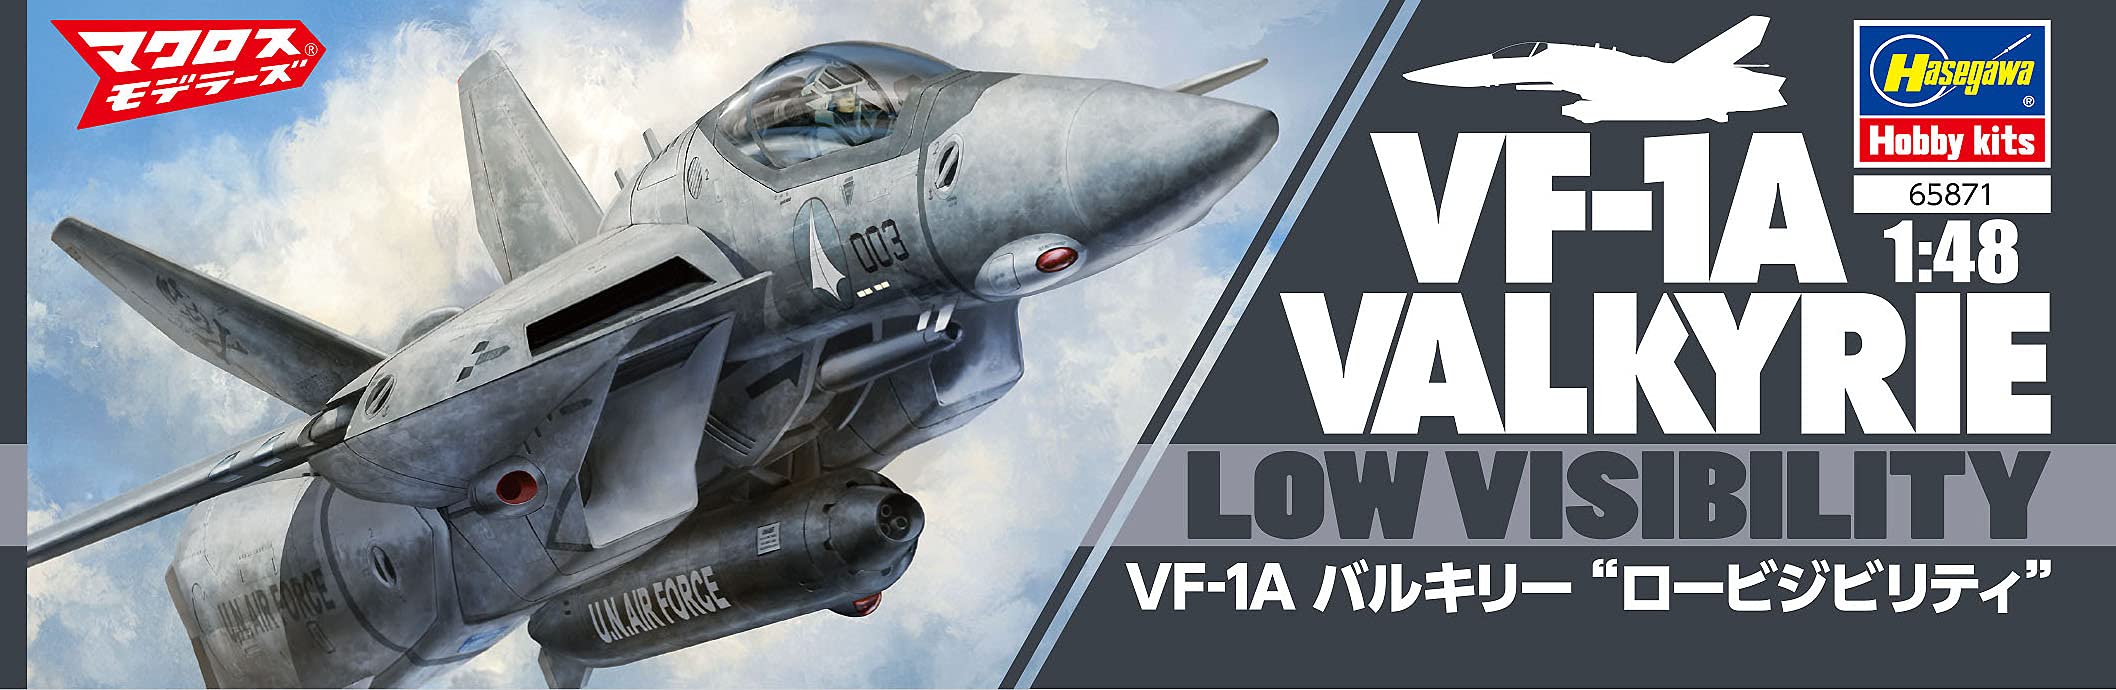 HASEGAWA 1/48 Macross Vf-1A Valkyrie Fighter Low Visibility Plastic Model